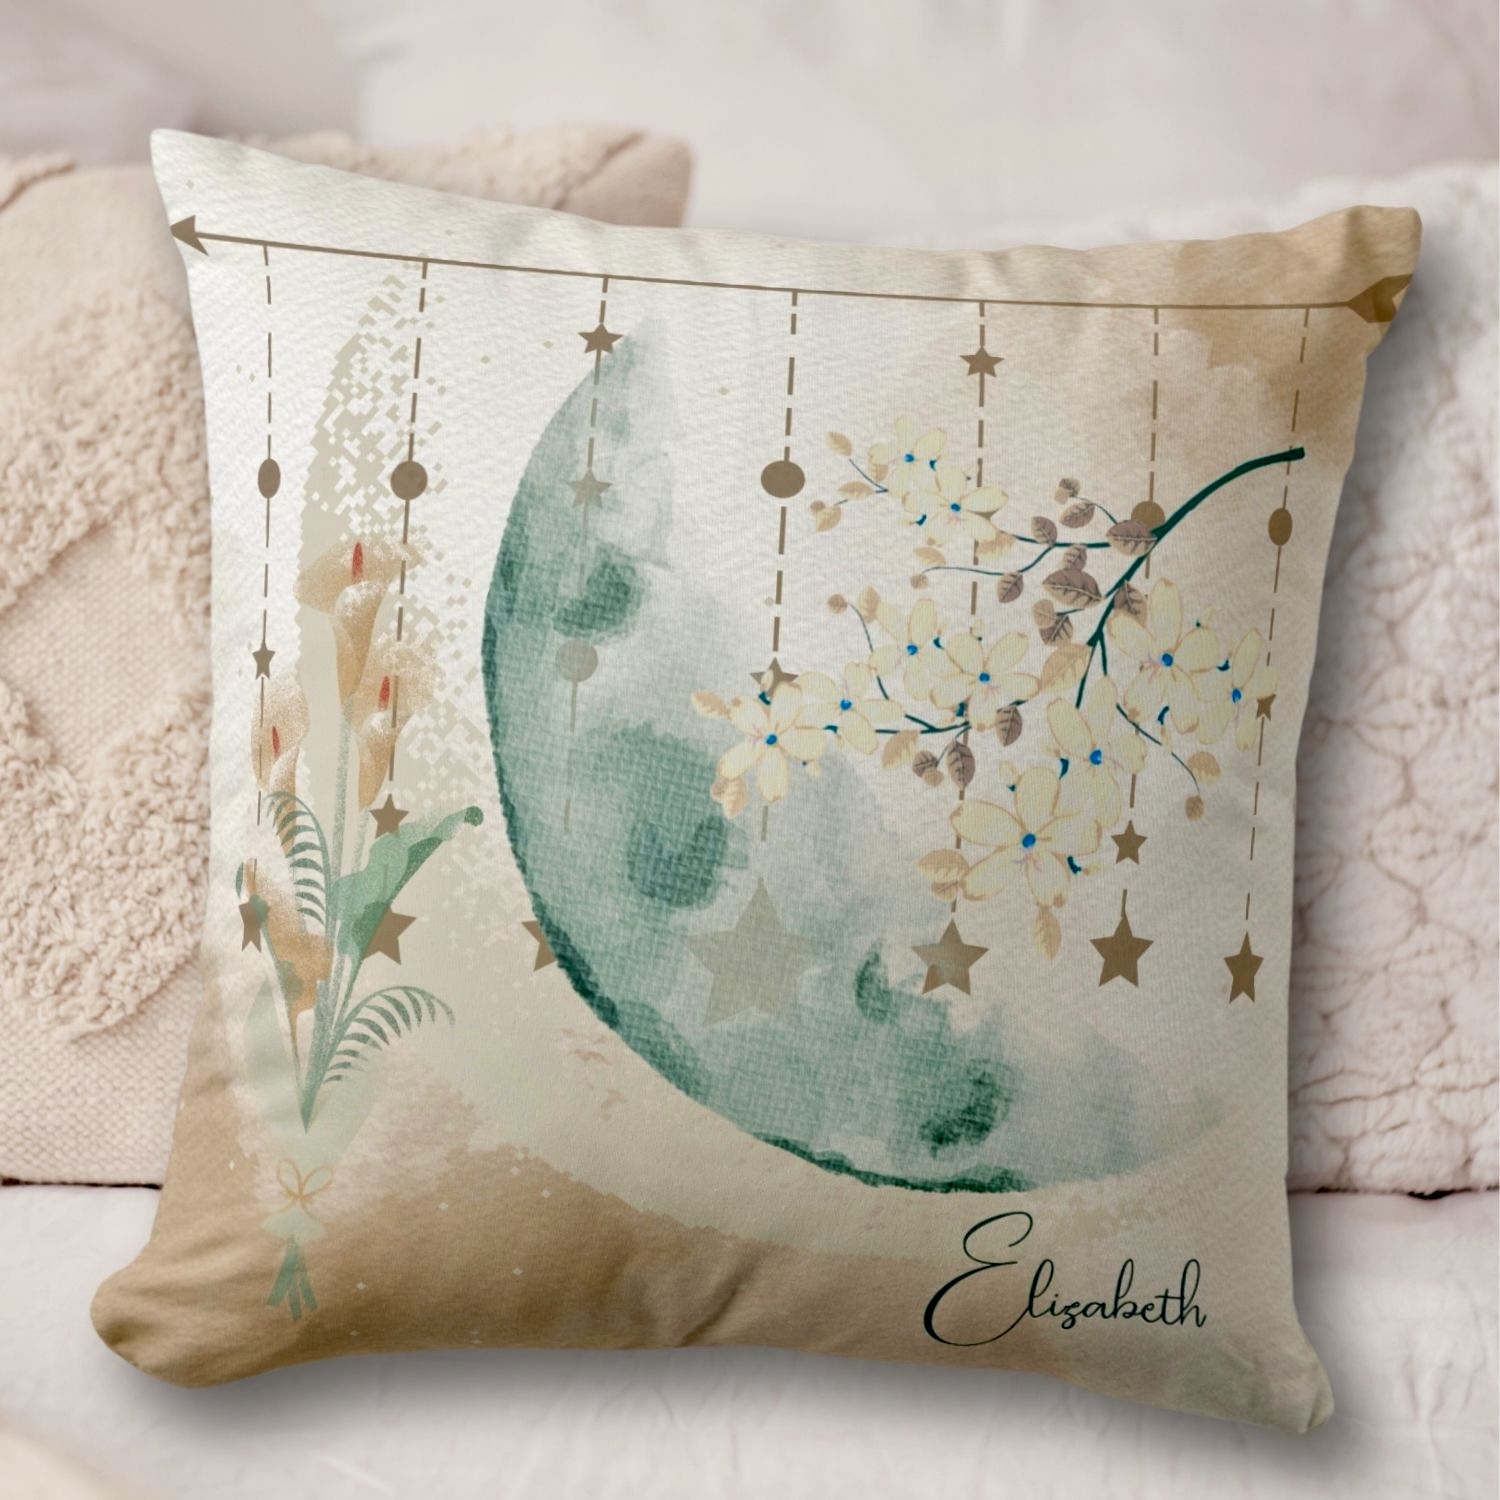 Close-up view of our Moonlit Flowers Decorative Pillow, adding a touch of tranquility to your home decor.